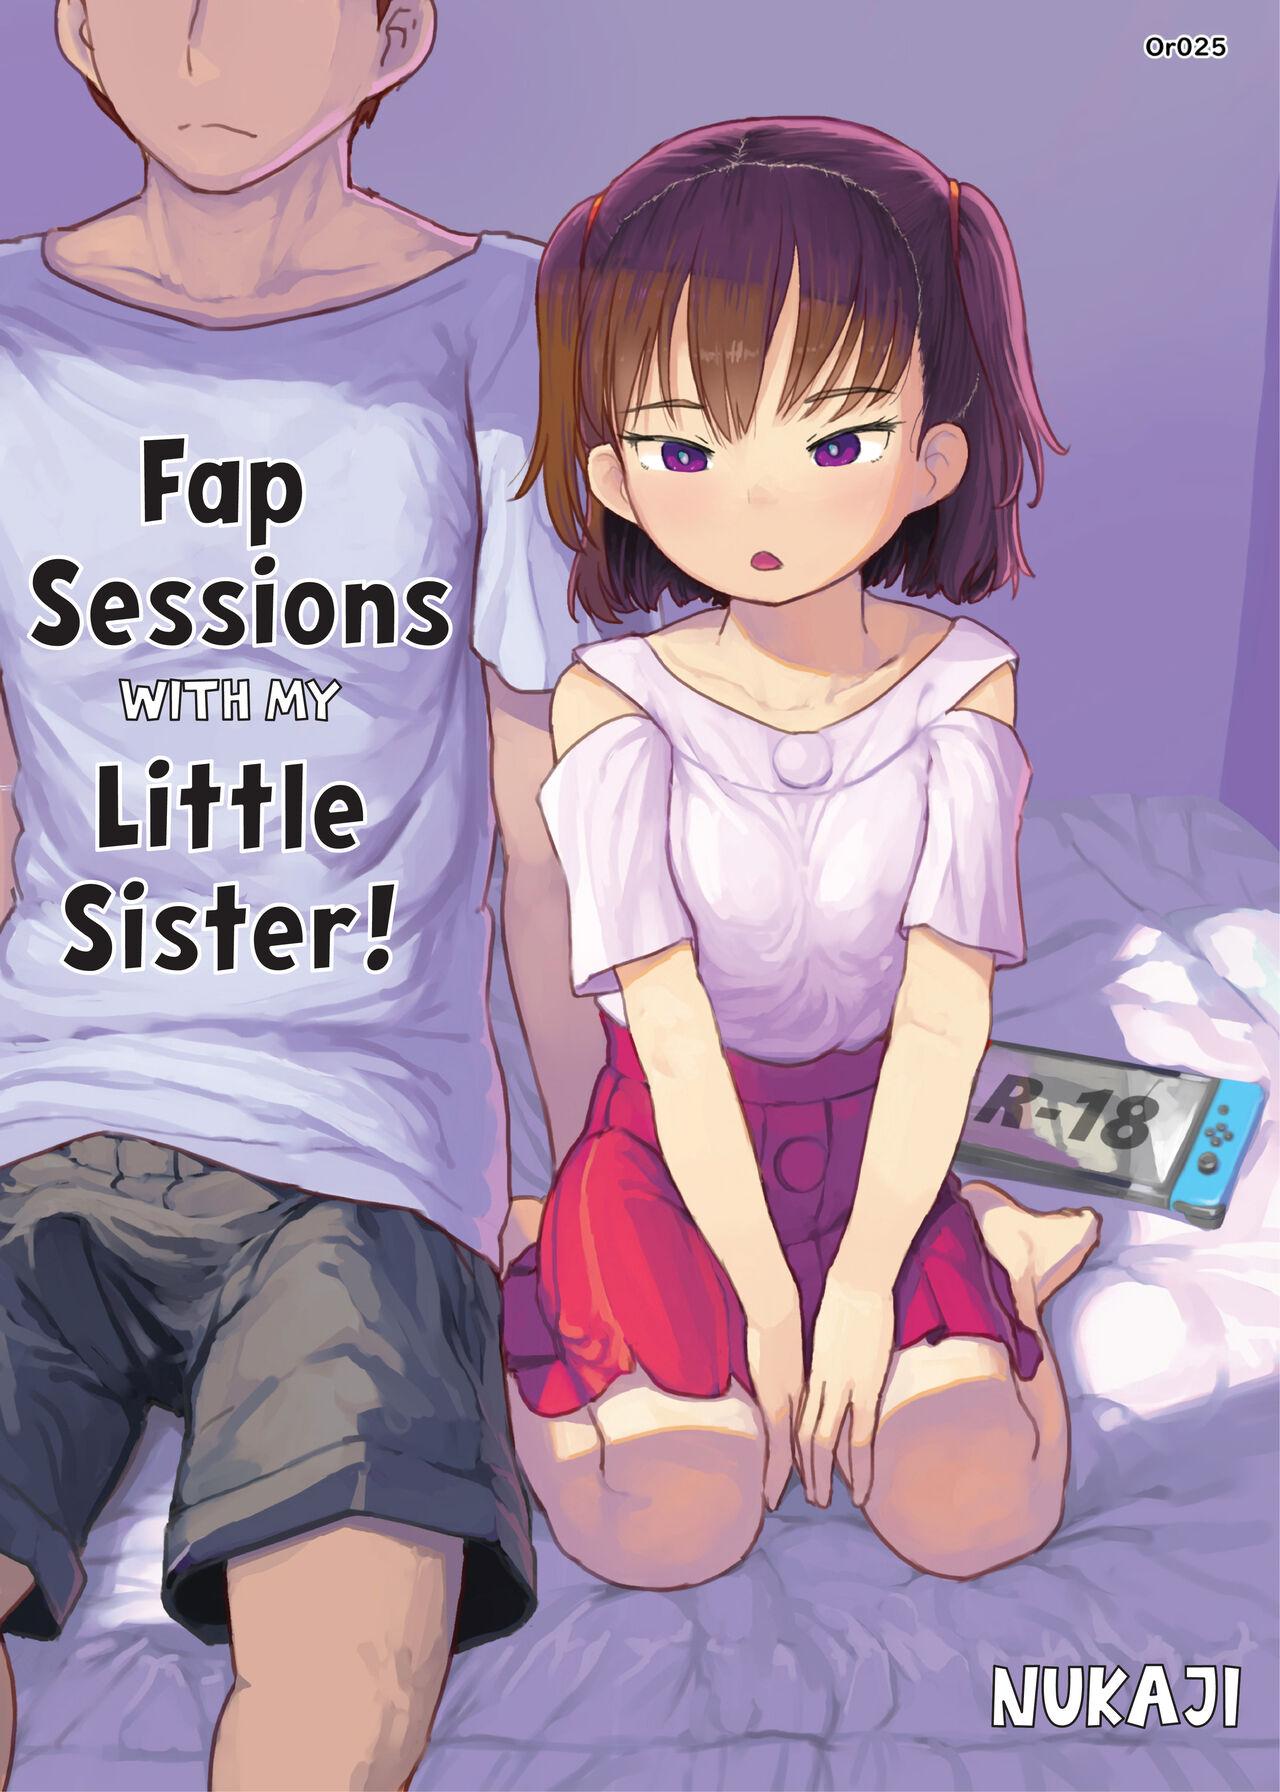 She Imouto to Nuku | Fap Sessions with my Little Sister! - Original Cumload - Page 1